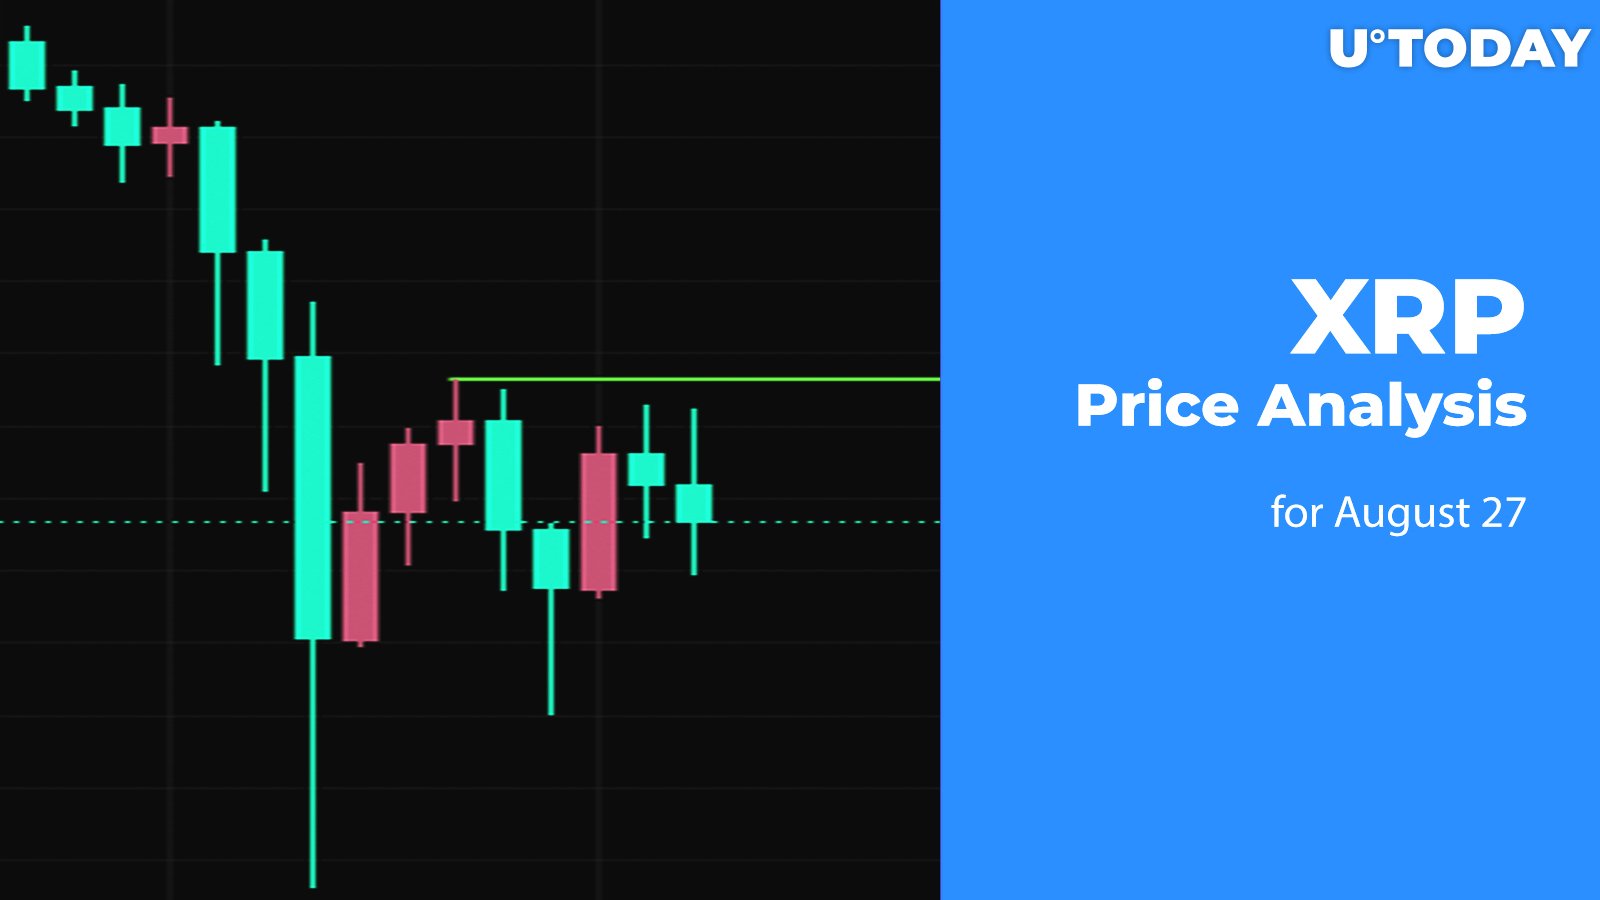 XRP Price Analysis for August 27